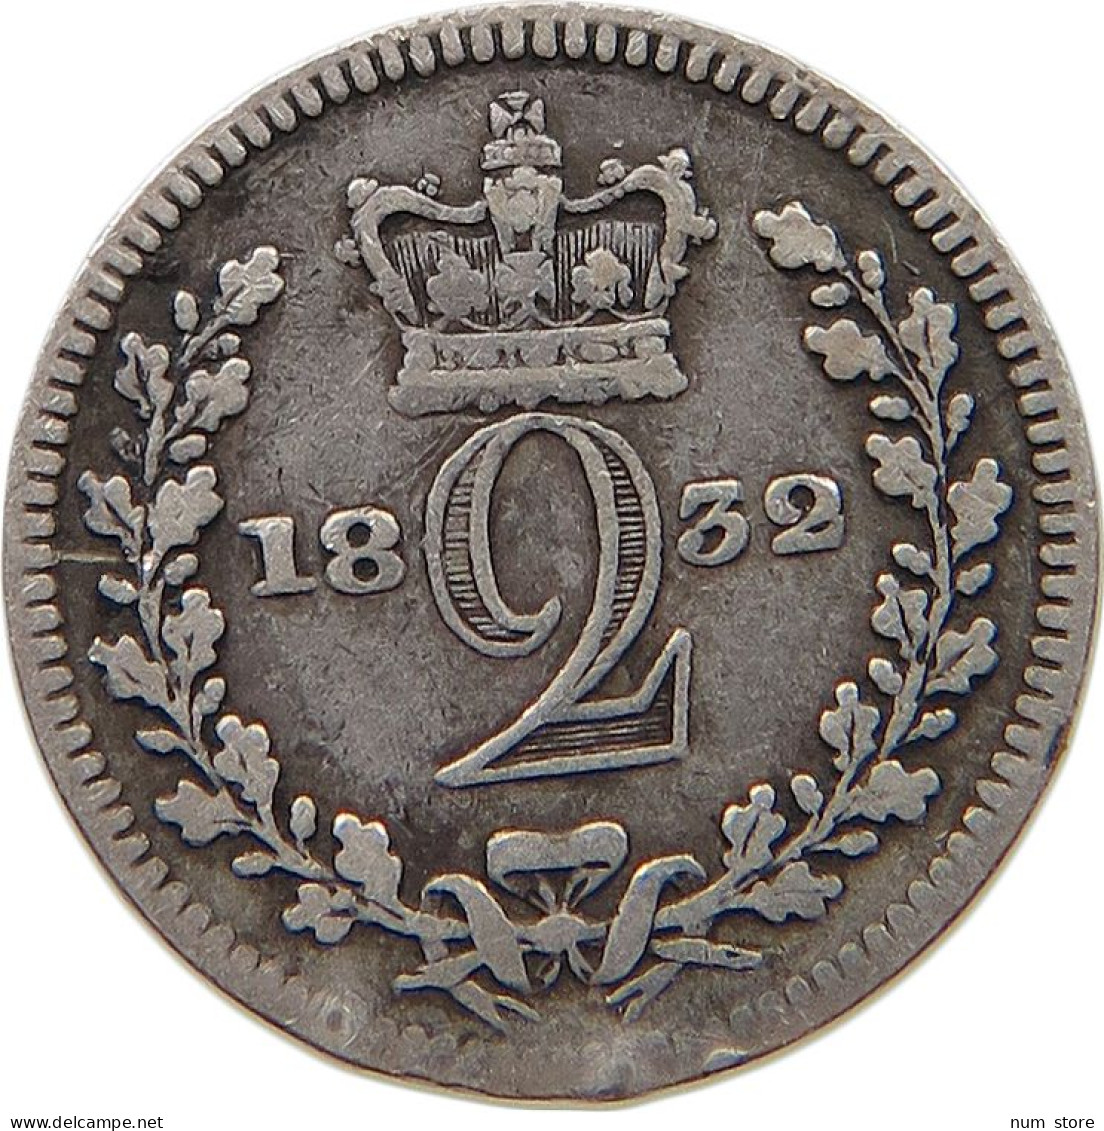 GREAT BRITAIN TWOPENCE 1832 WILLIAM IV. (1830-1837) #t121 0327 - D. 2 Pence